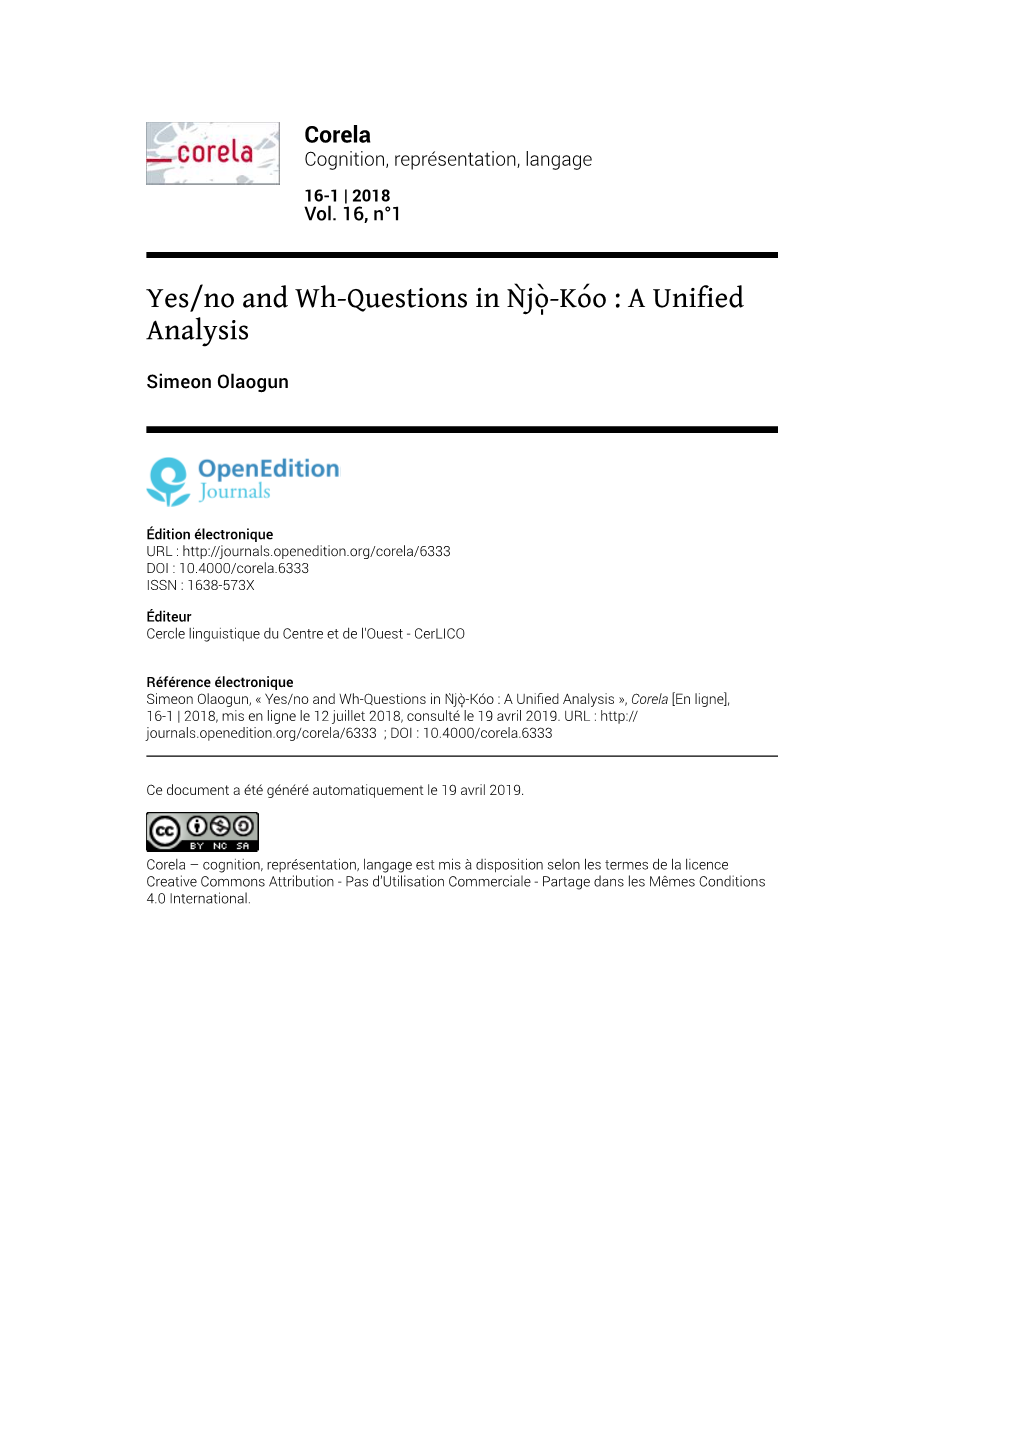 Yes/No and Wh-Questions in Ǹjò̩-Kóo : a Unified Analysis